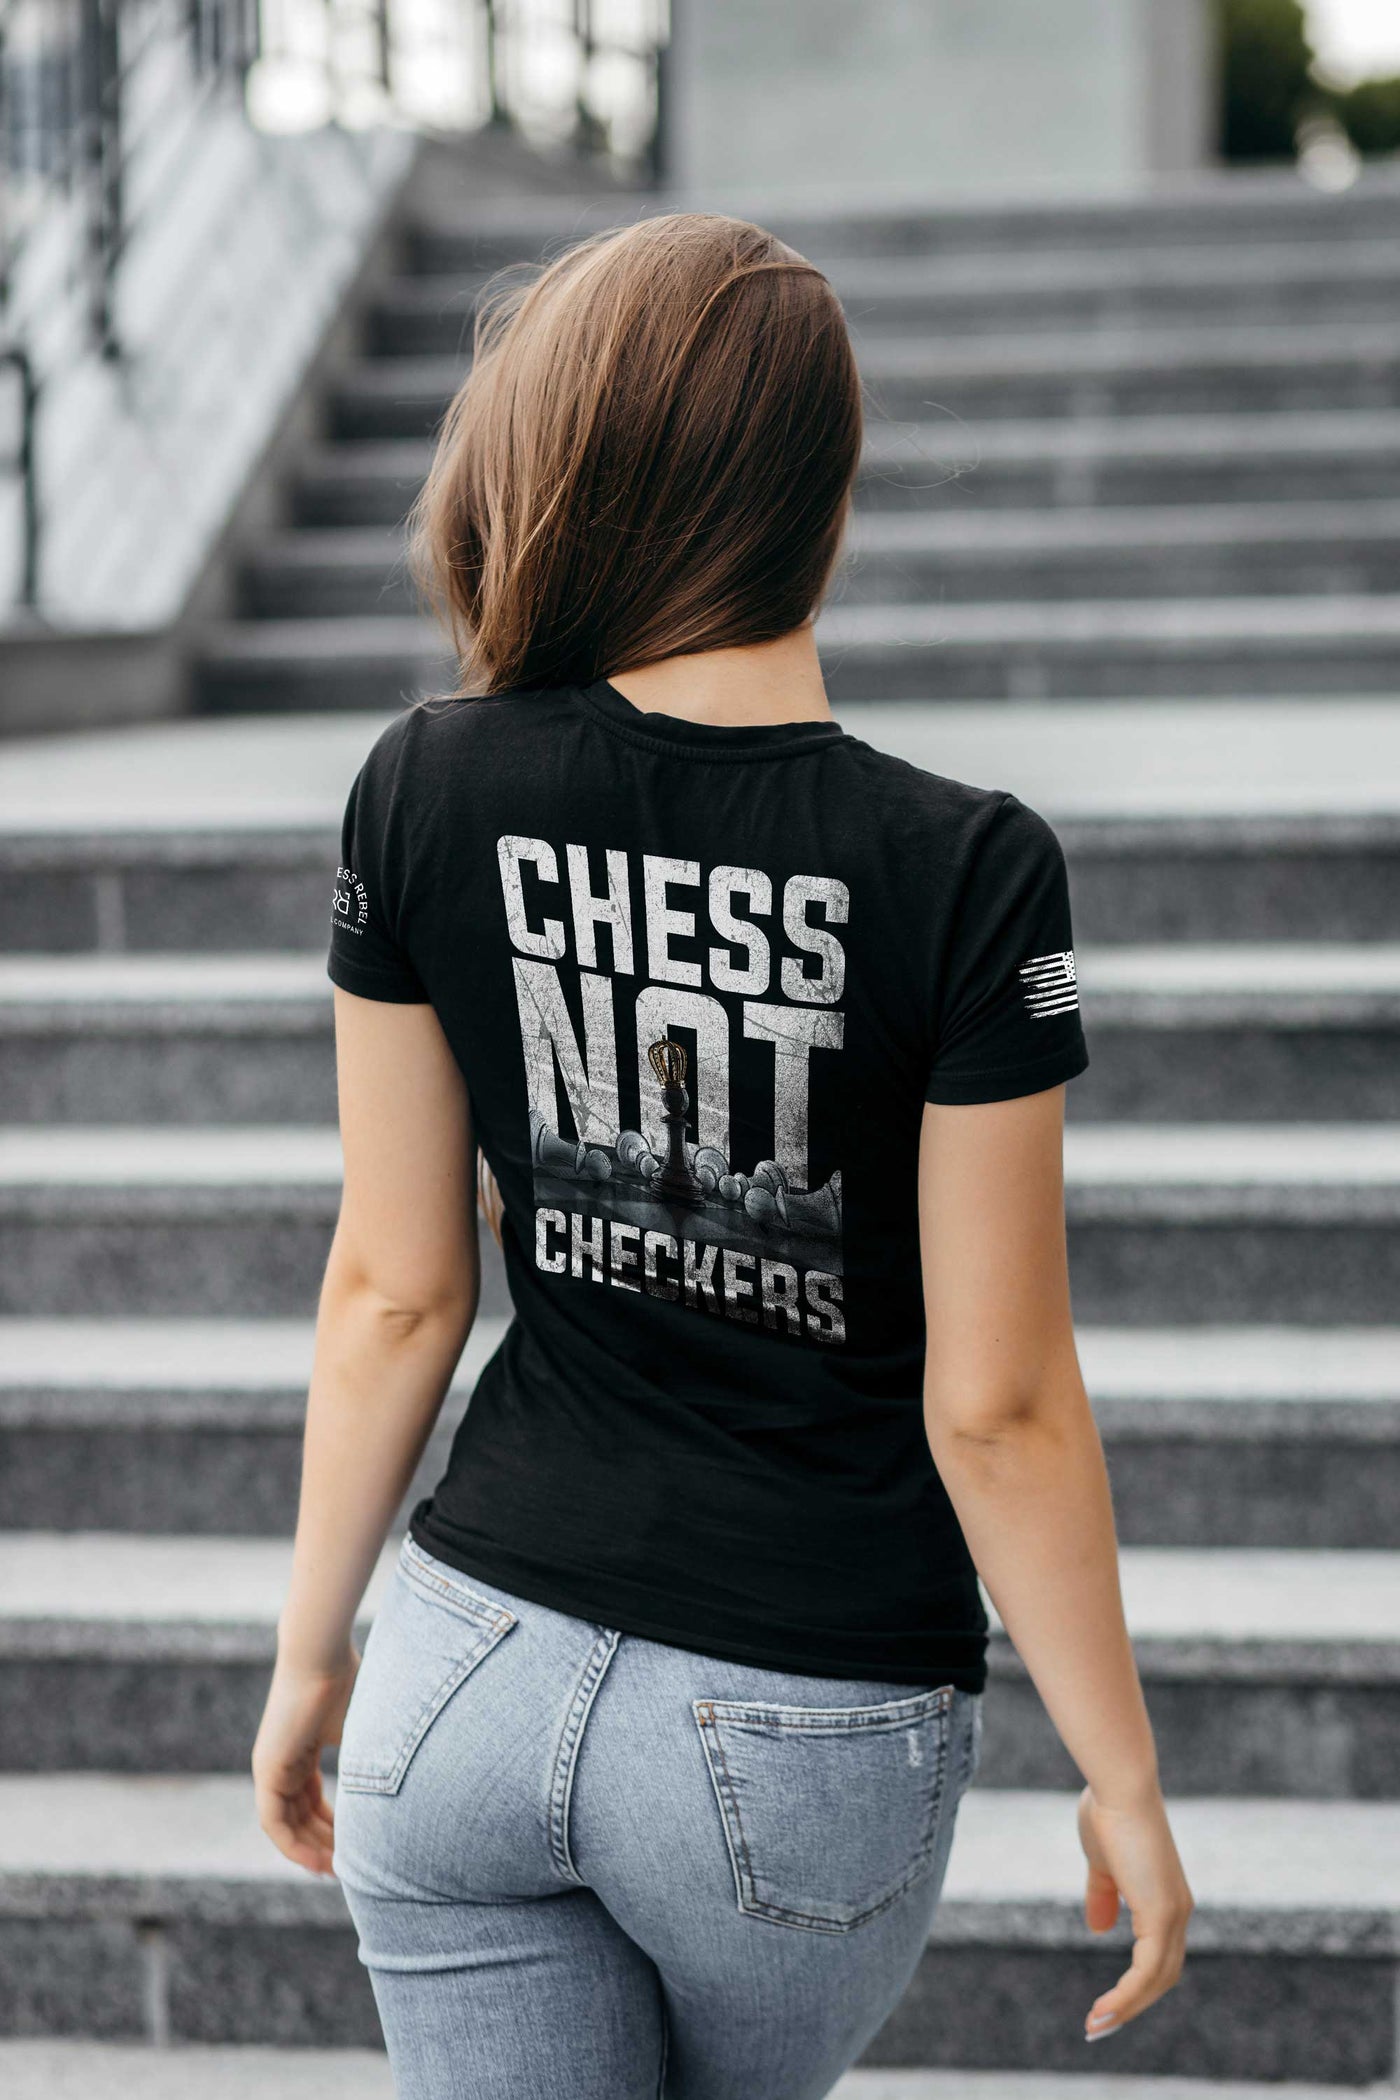 Woman wearing Solid Black Women's Chess Not Checkers Back Design Tee